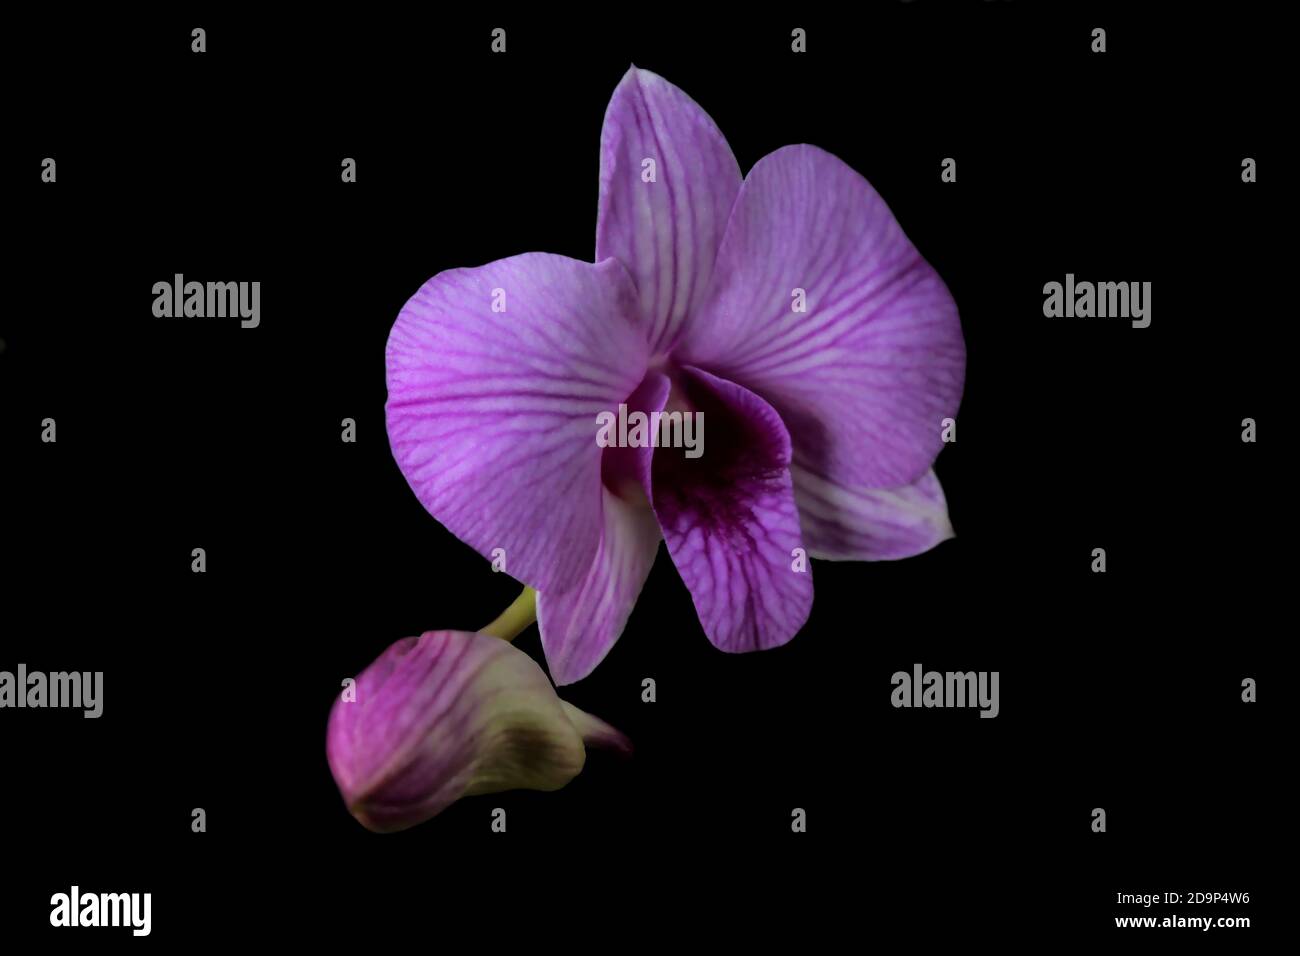 Purple striped orchid with black background Stock Photo